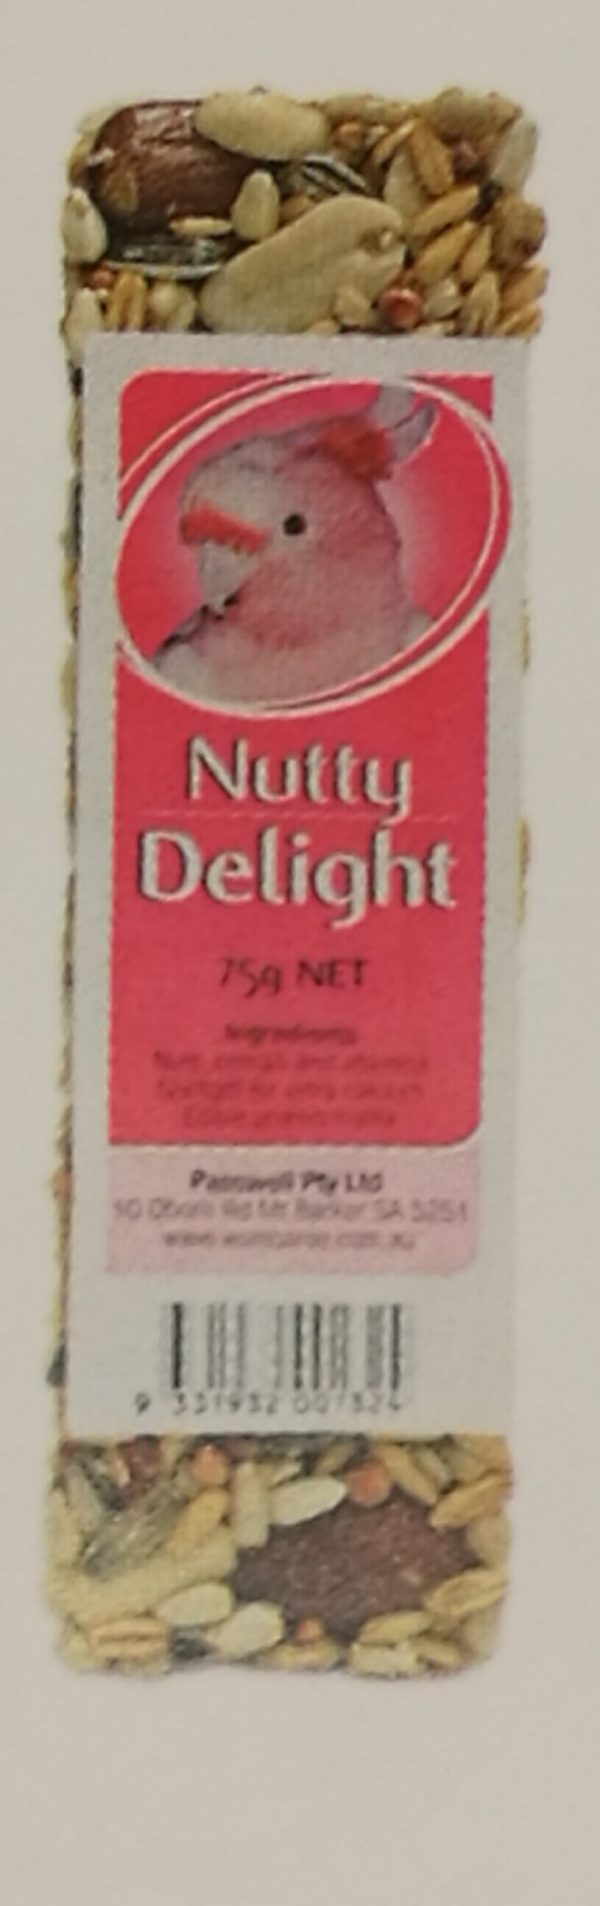 nutty delight